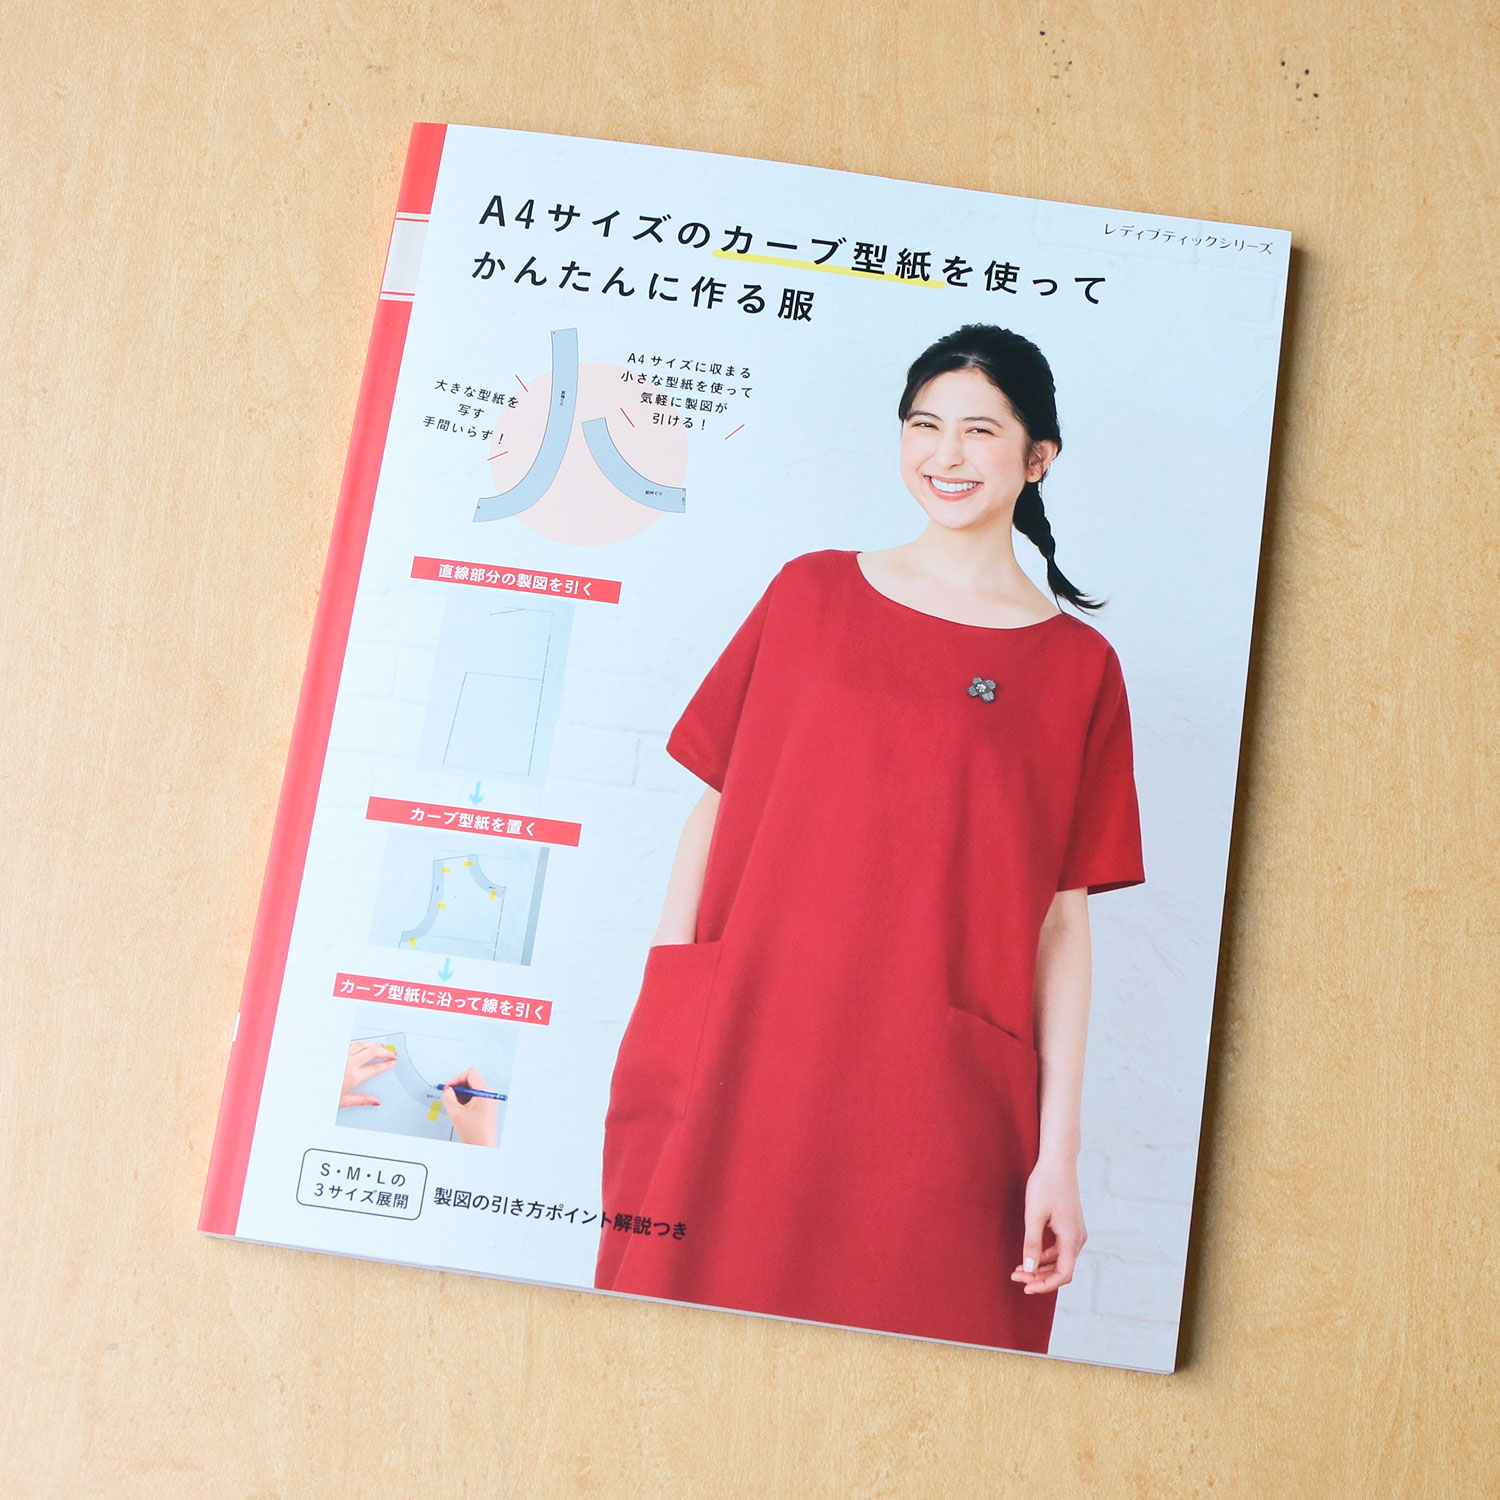 S8414 Clothes you can easily make using A4 size curved pattern paper(book)